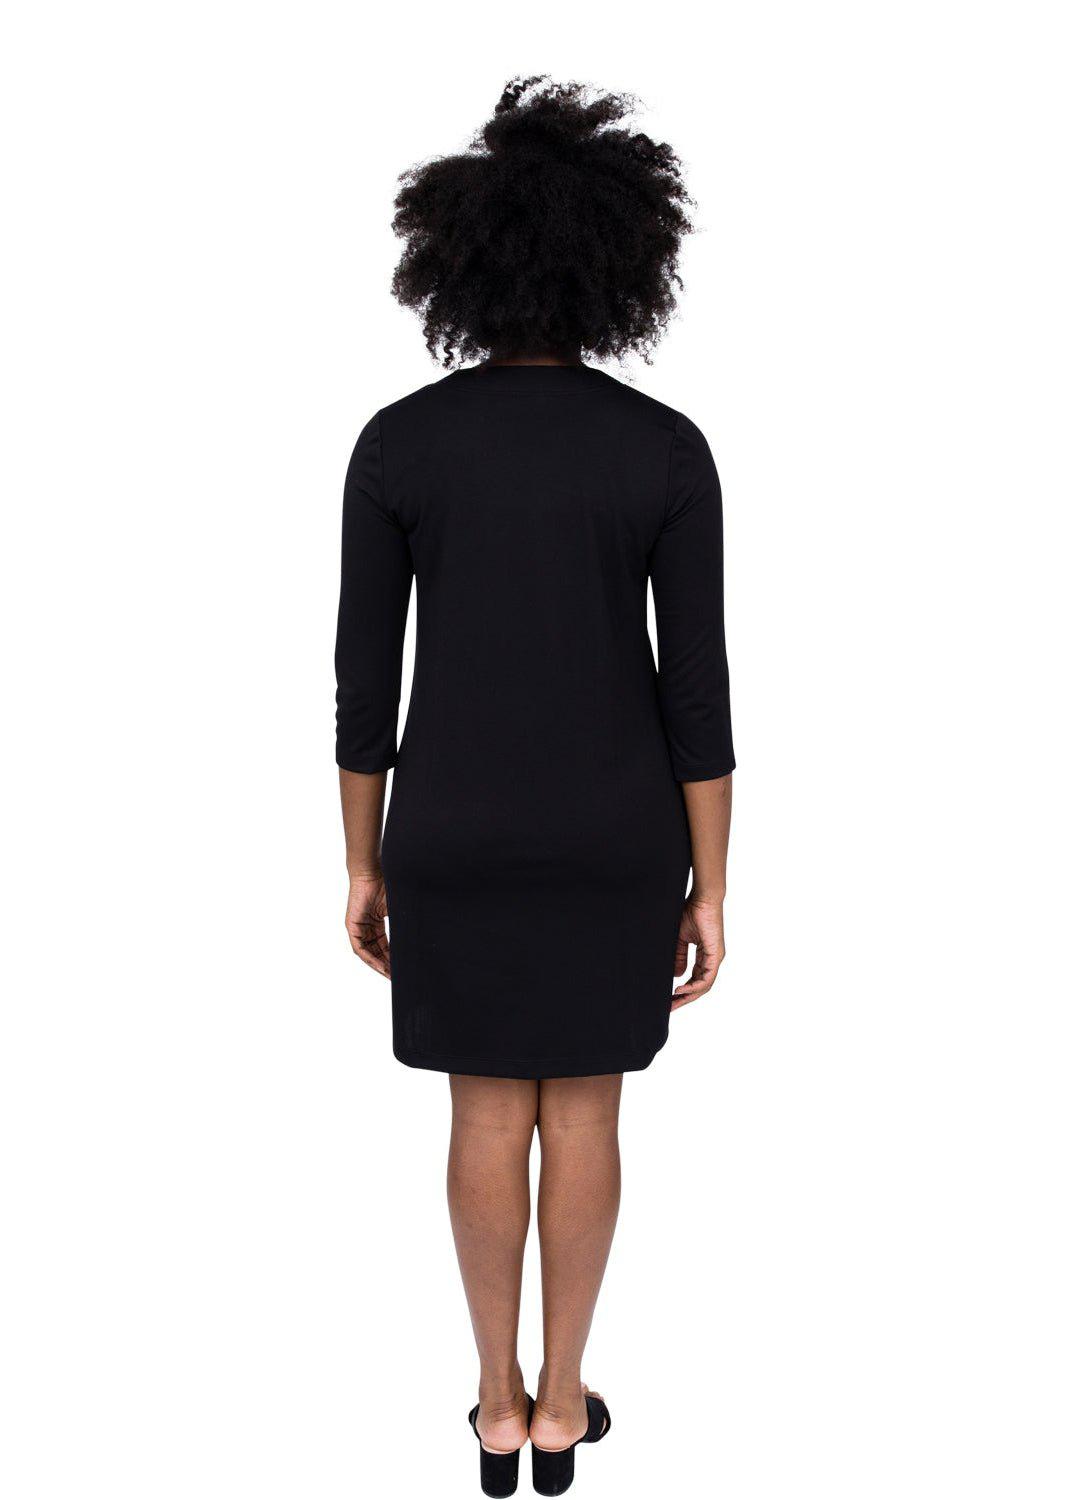 Lucy Dress 3/4 - Solid Black-2